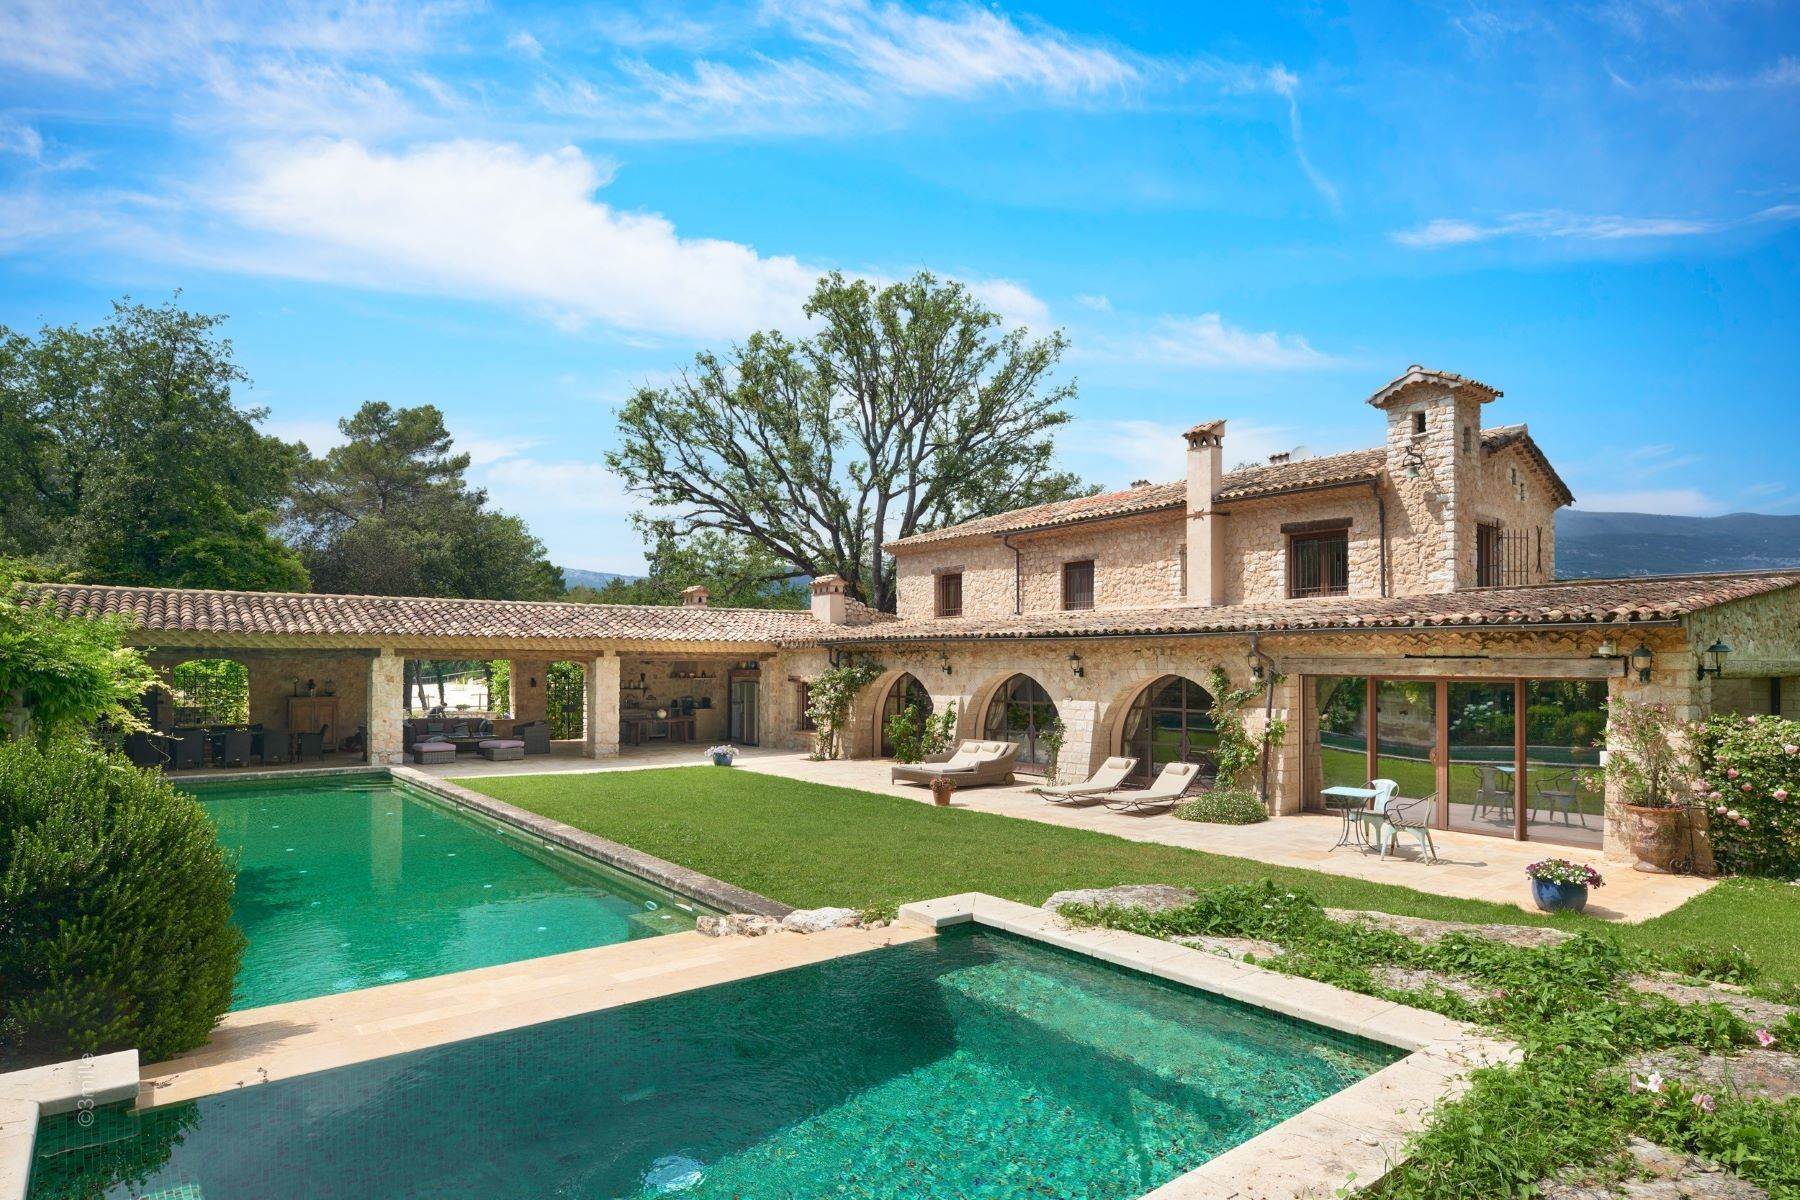 Single Family Homes for Sale at Luxurious private domain with professional stables - an exceptional Haras. Luxurious private domain with professional stables - an exceptional Haras., Roquefort Les Pins, Provence-Alpes-Cote D'Azur 06330 France